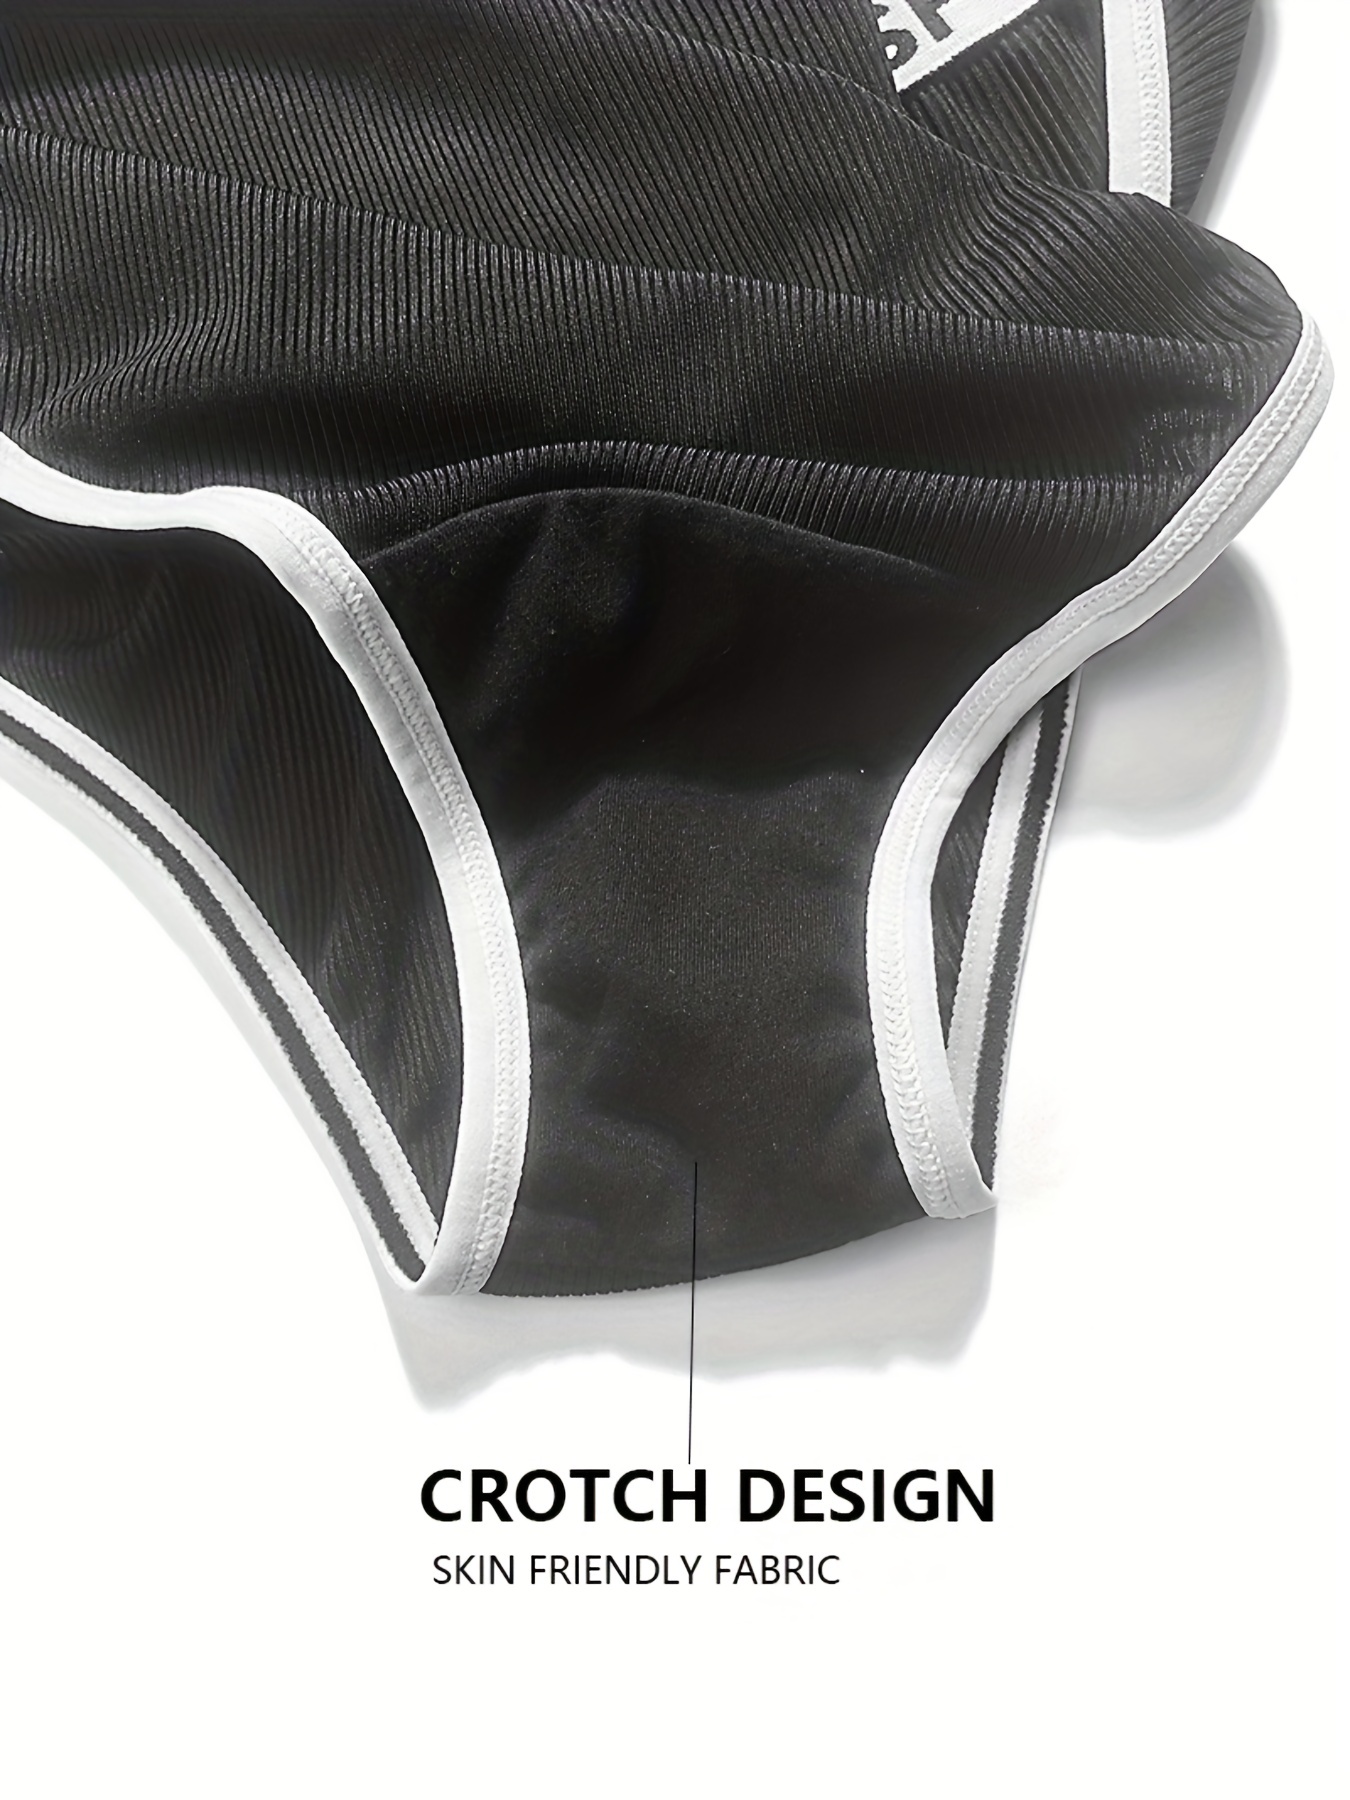 5-pack Ribbed Hipster Briefs